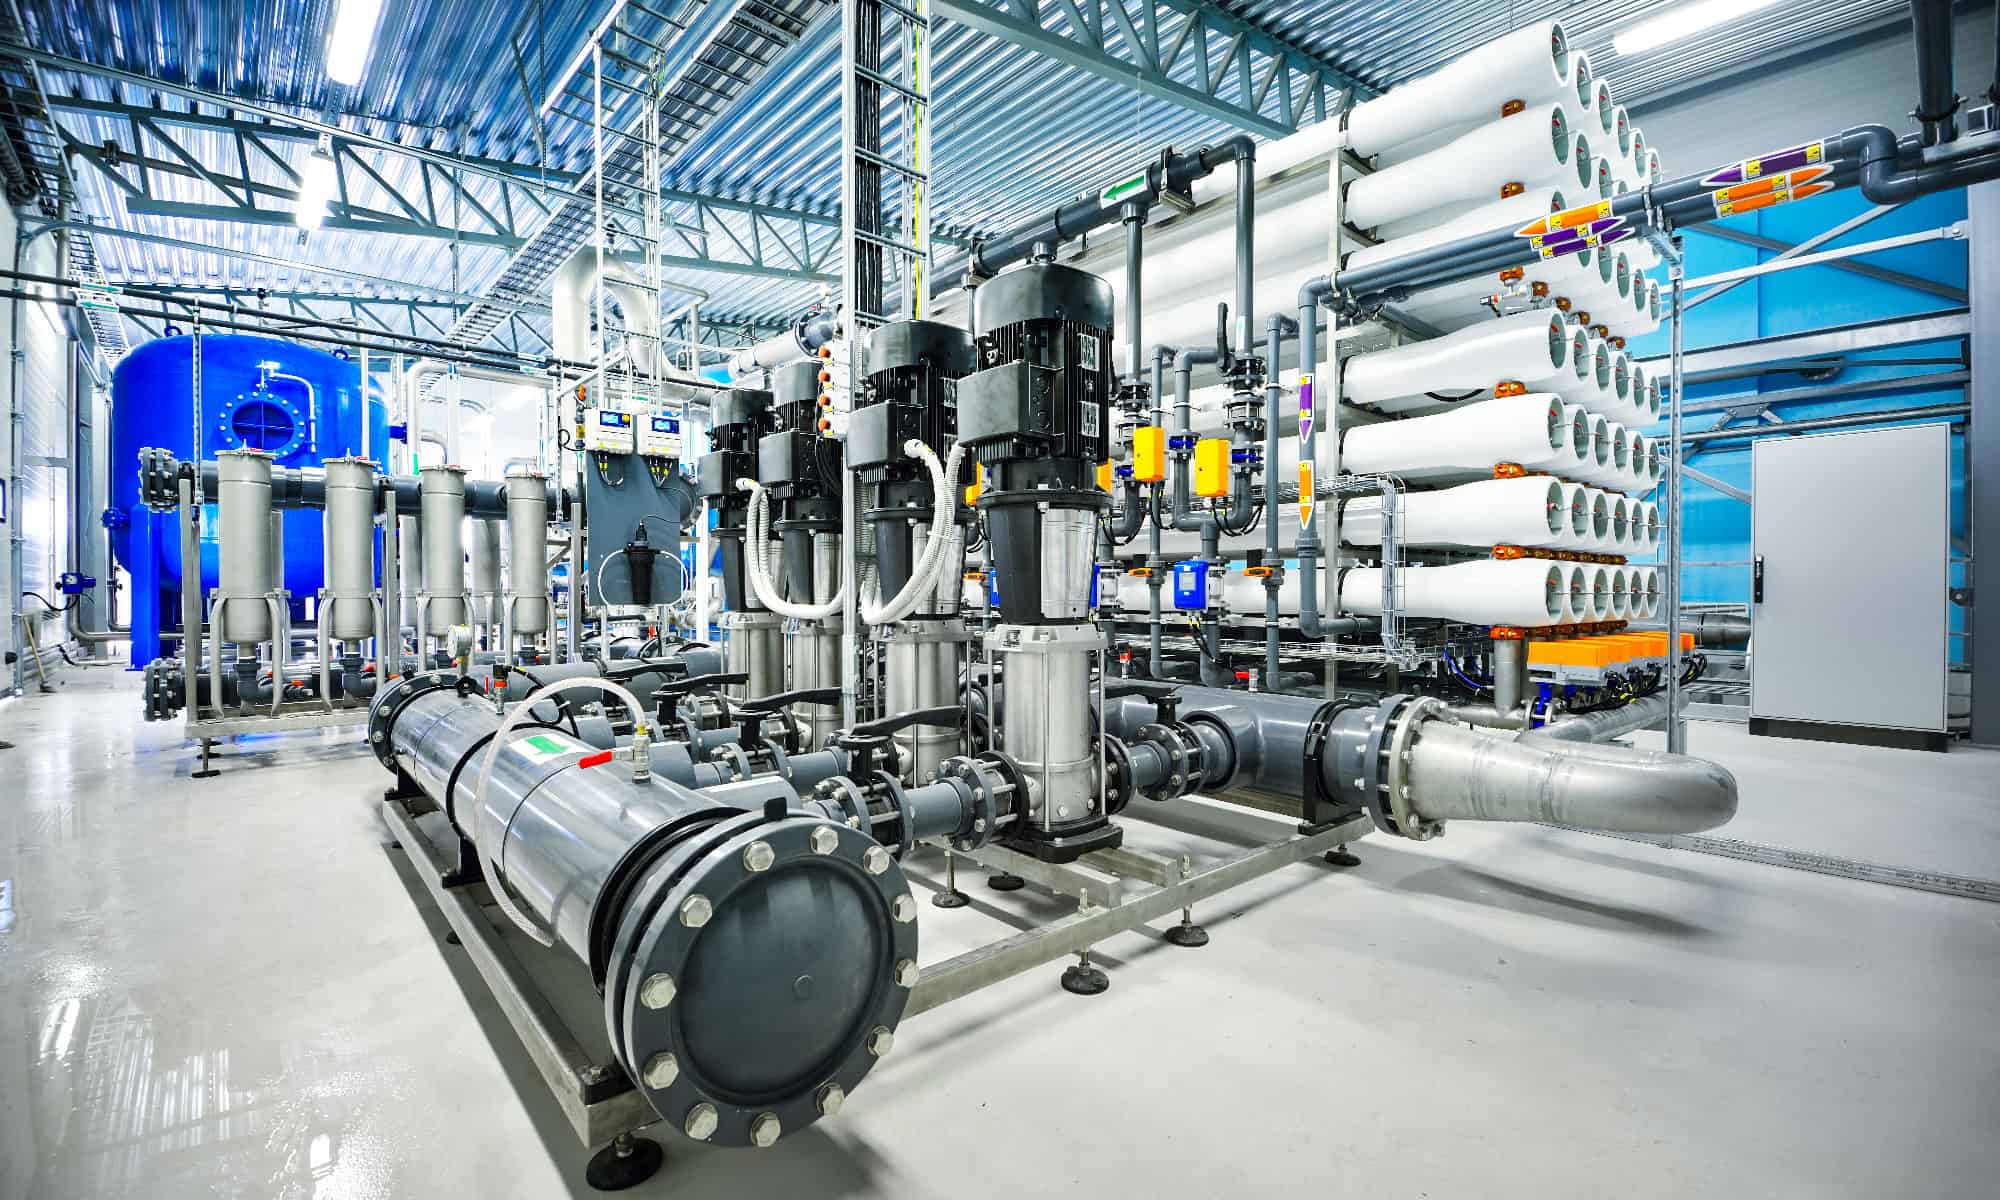 Pump station for reverse osmosis